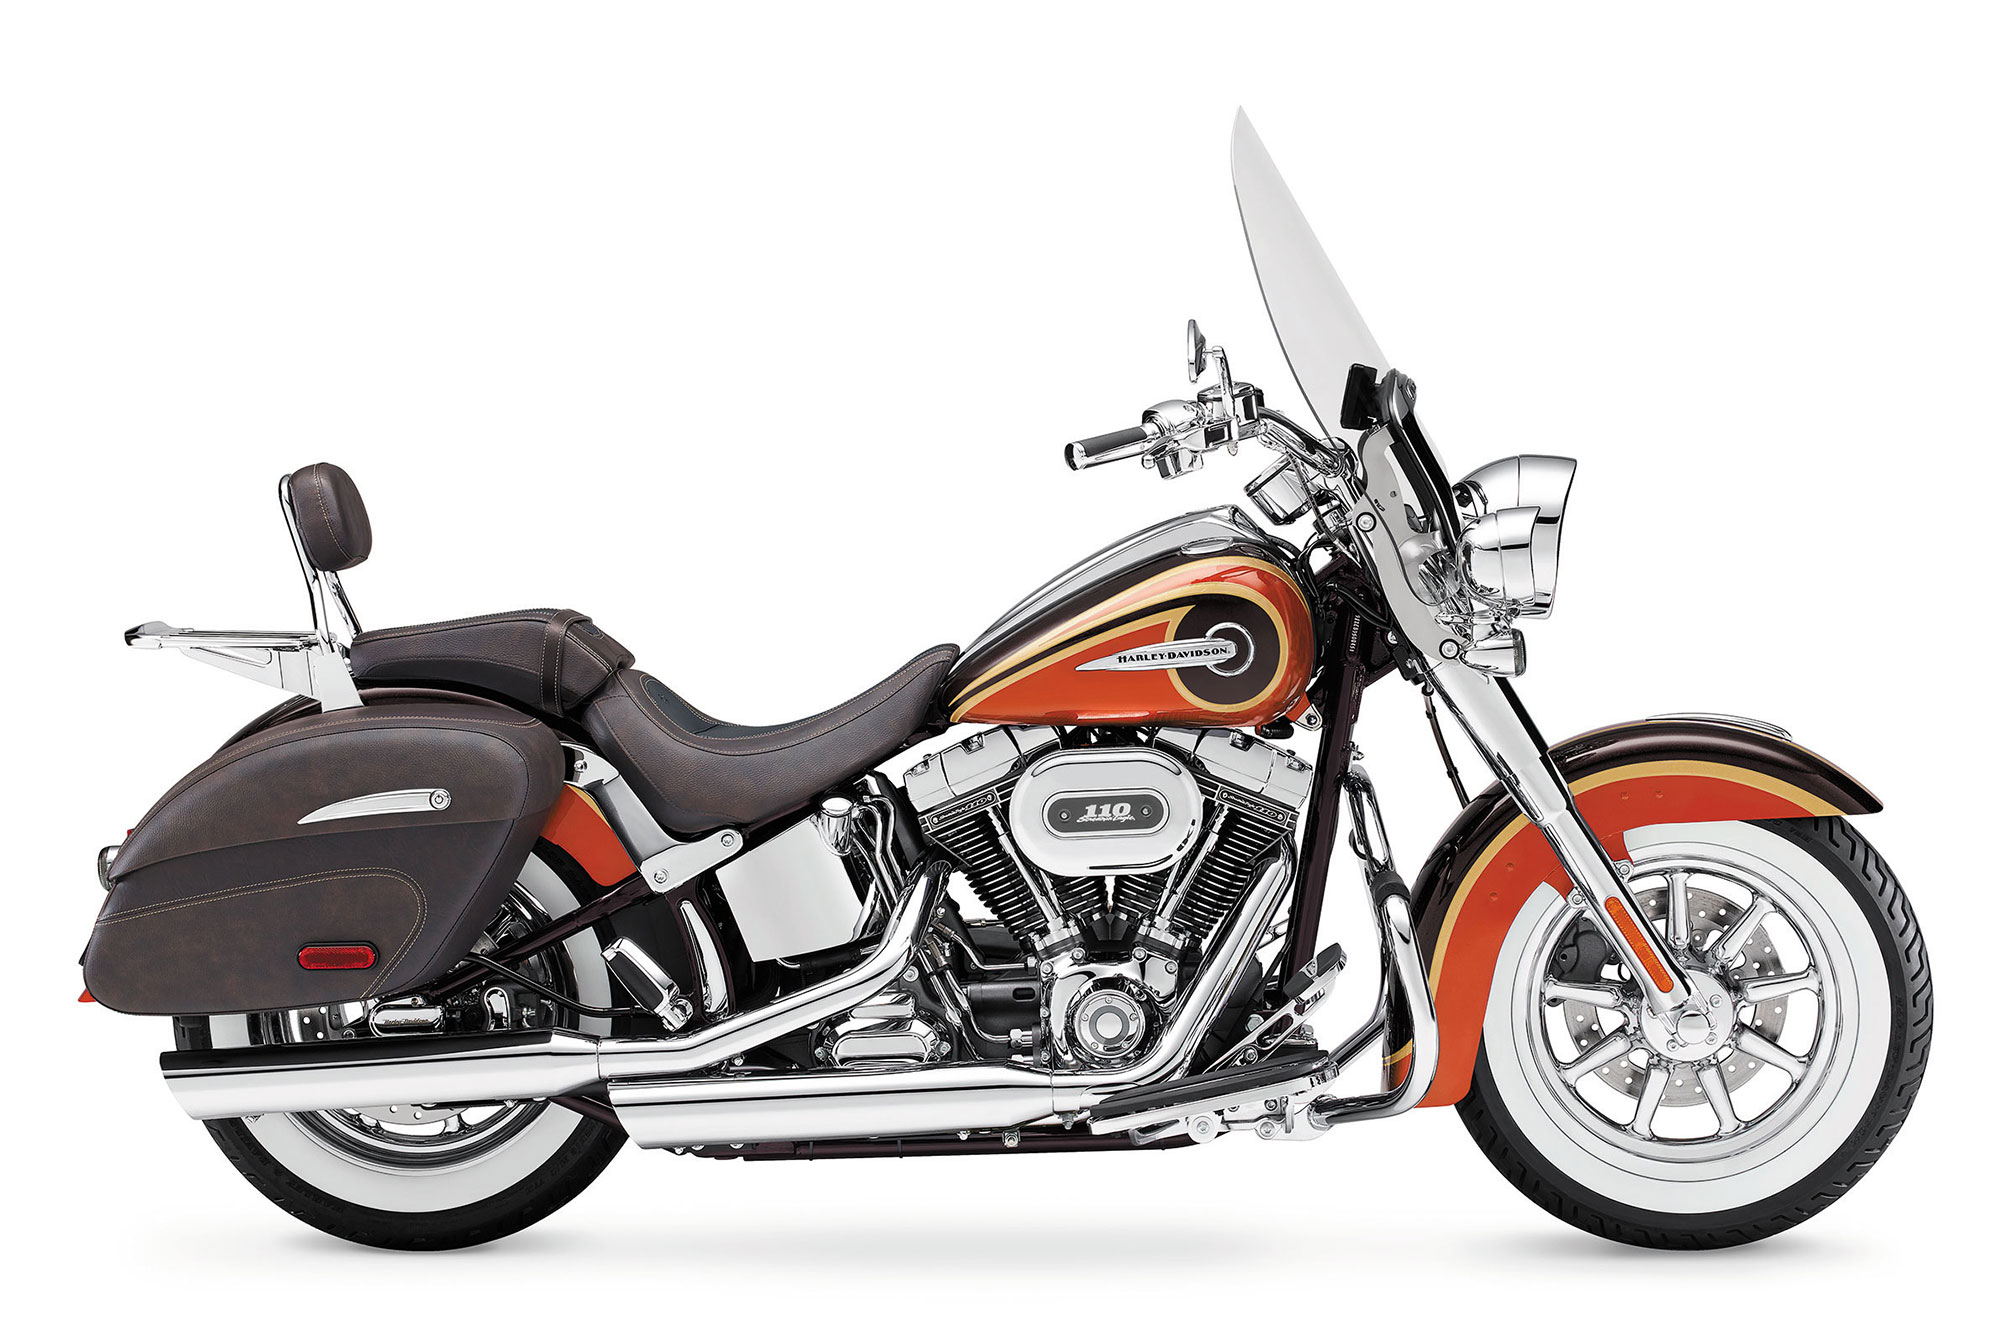 High Quality Tuning Files Harley Davidson 1800 Electra / Glide / Road King / Softail 1800 CVO Street Glide  98hp